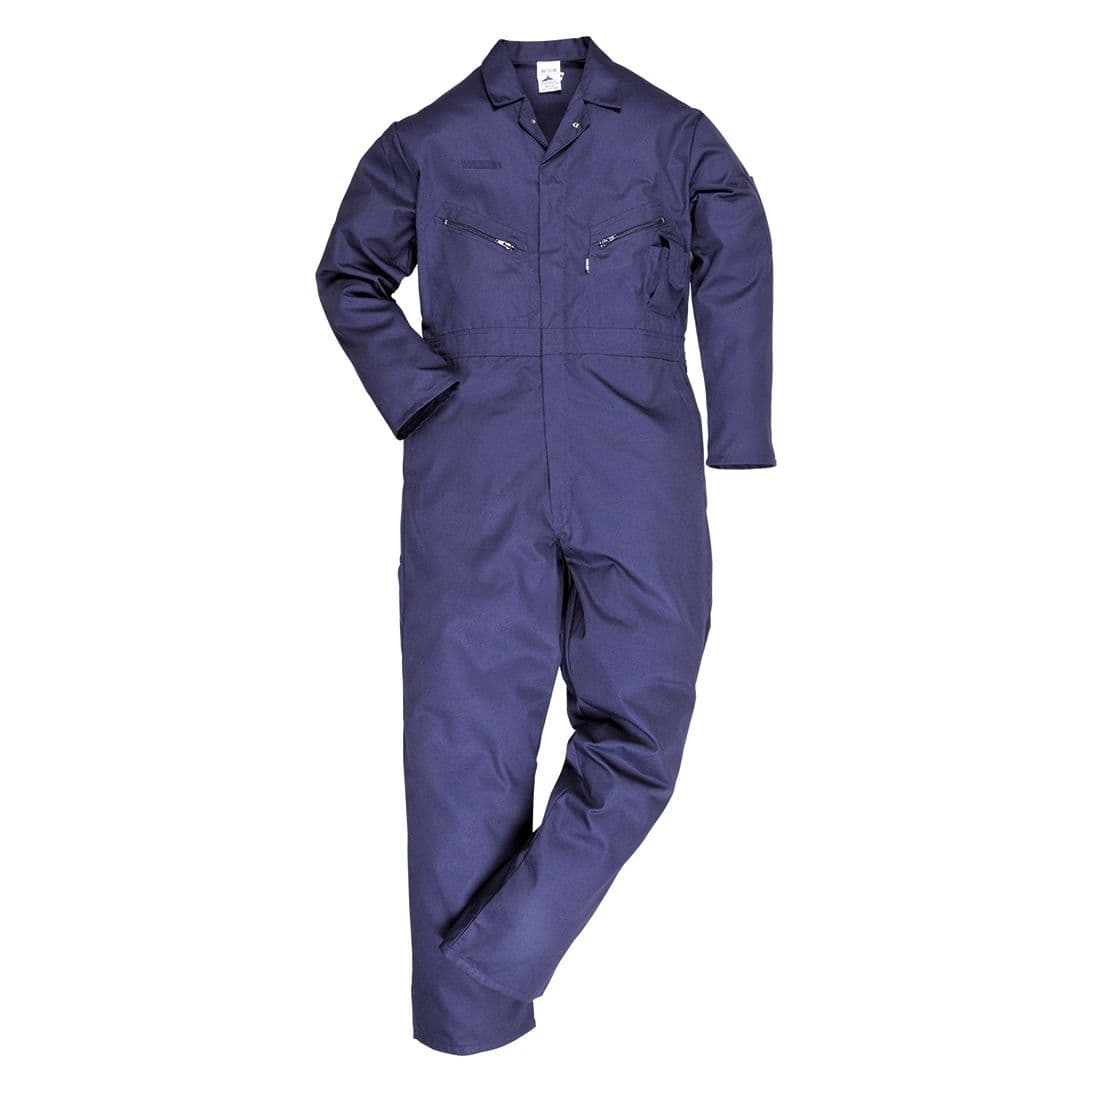 Portwest Dubai Coverall – Navy – S – Lightweight – PPE – Taft Safety Store